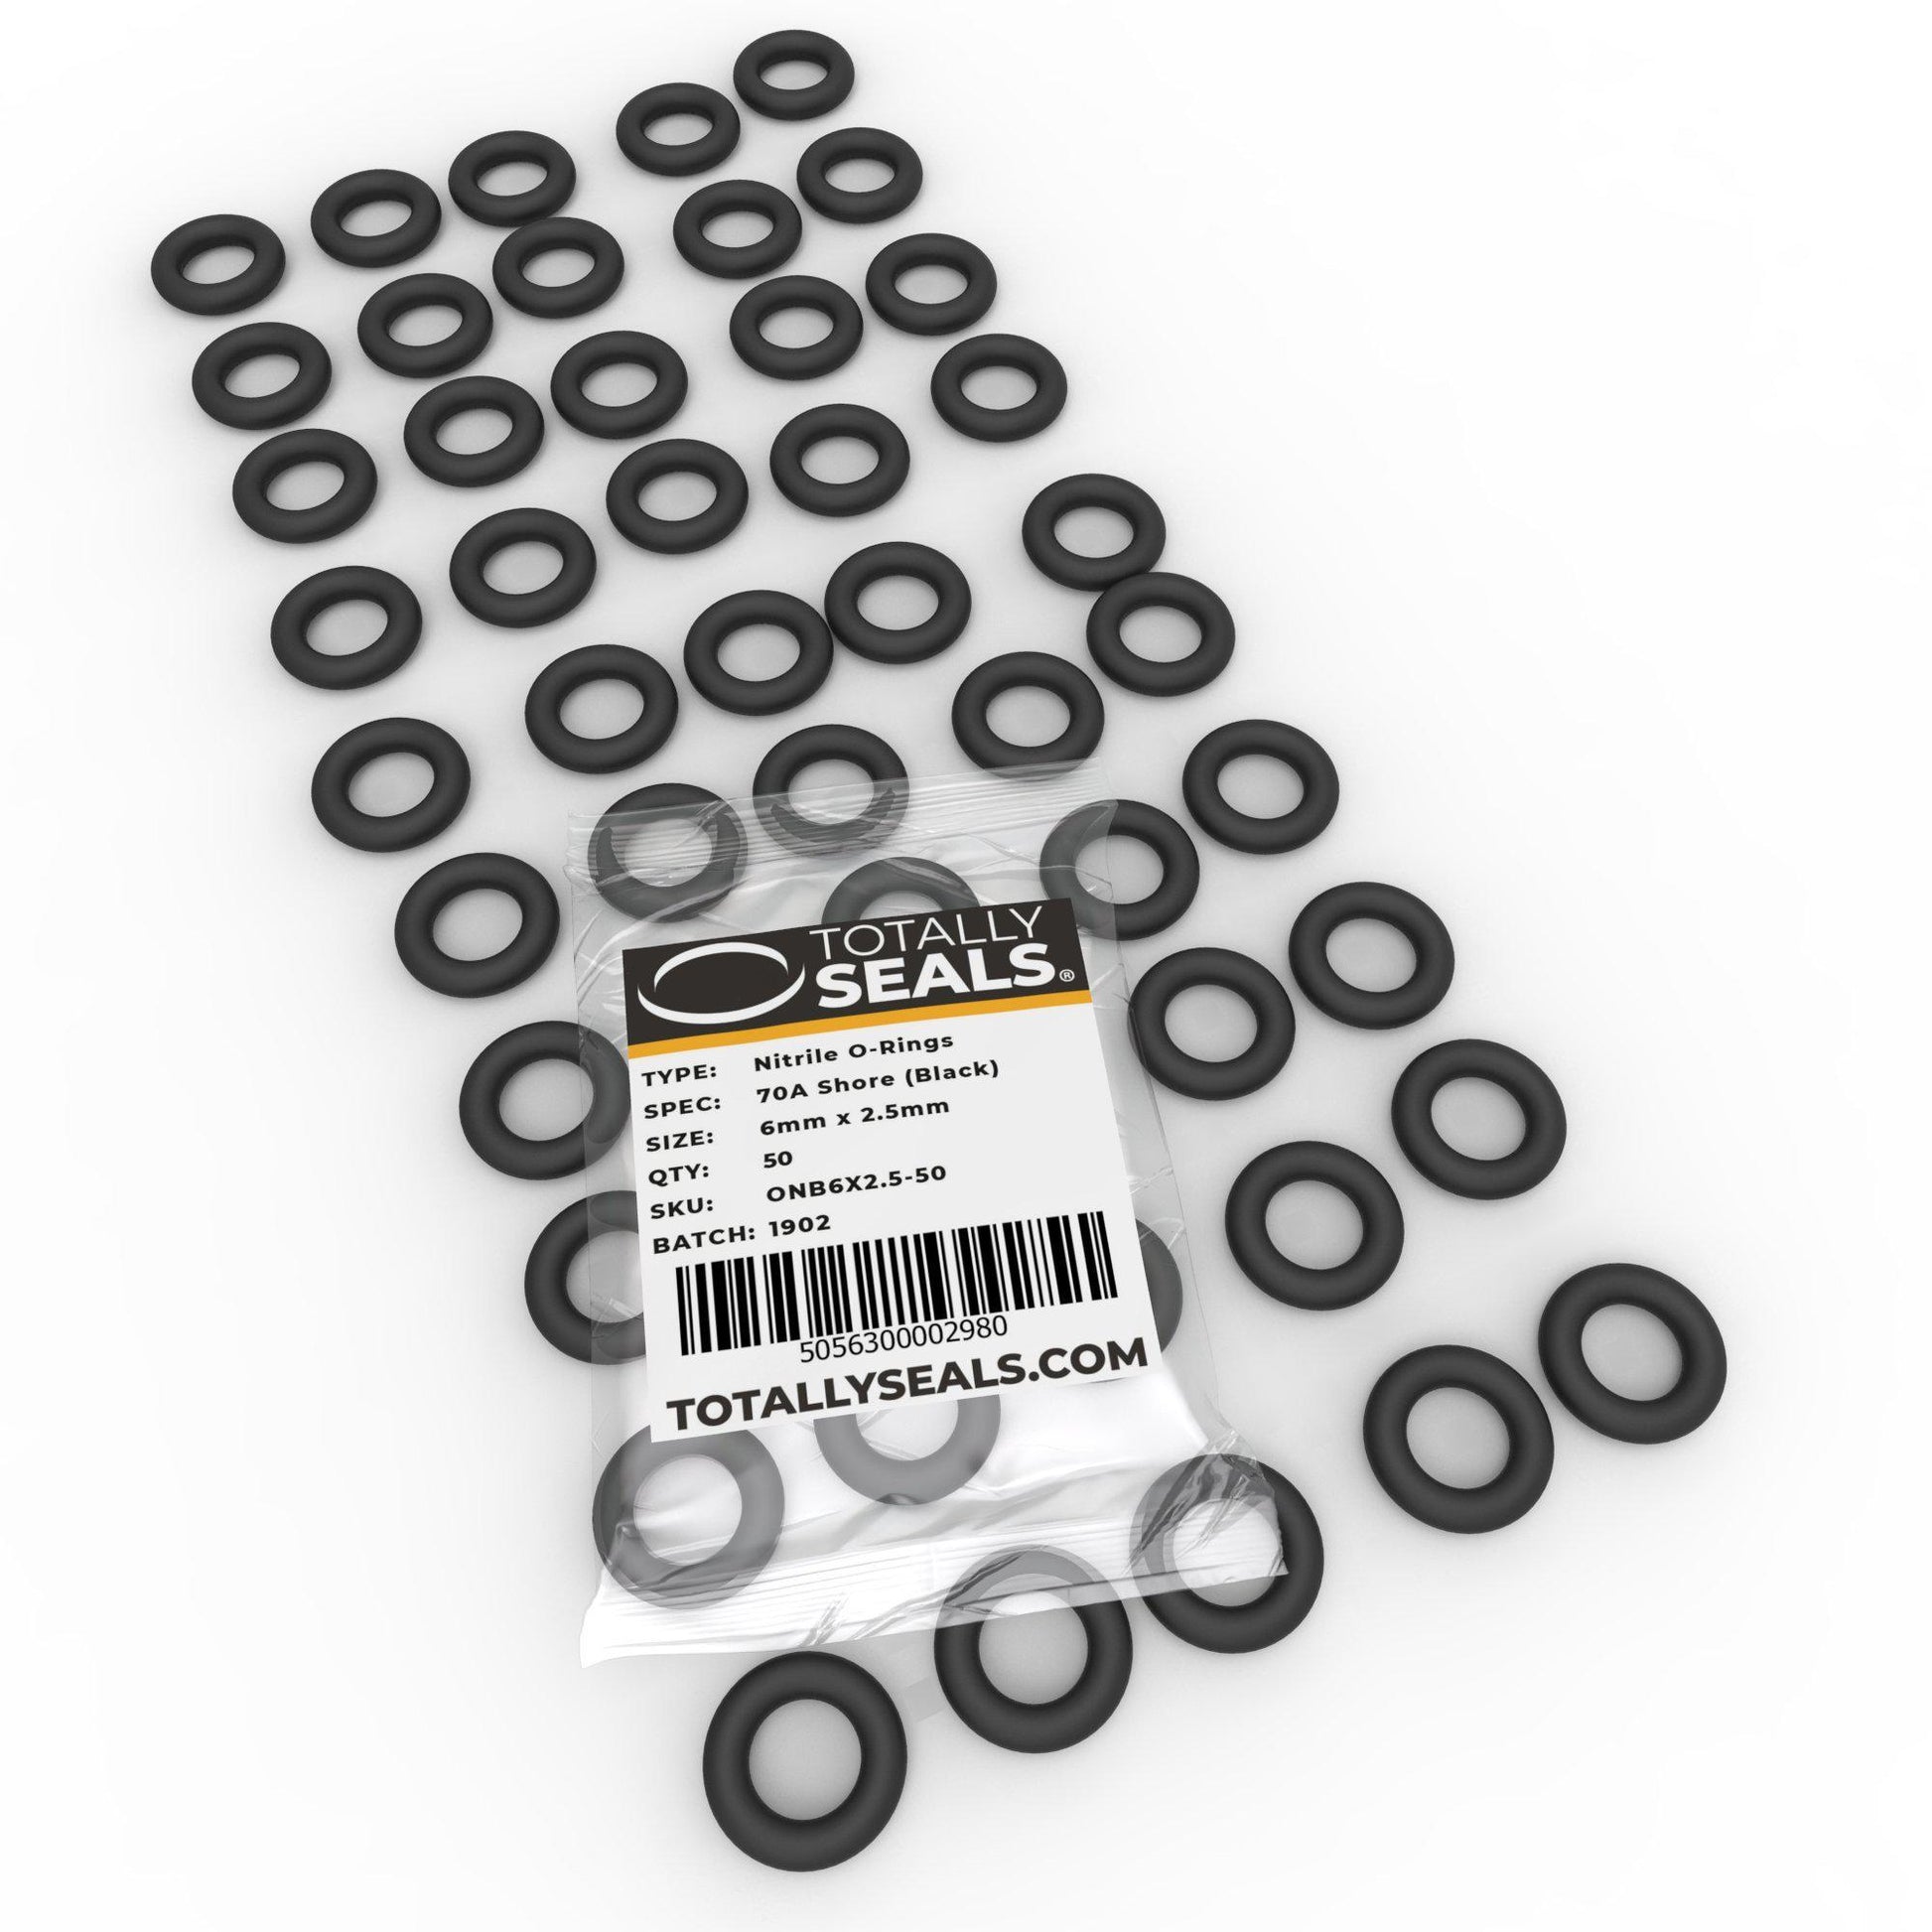 6mm x 2.5mm (11mm OD) Nitrile O-Rings - Totally Seals®